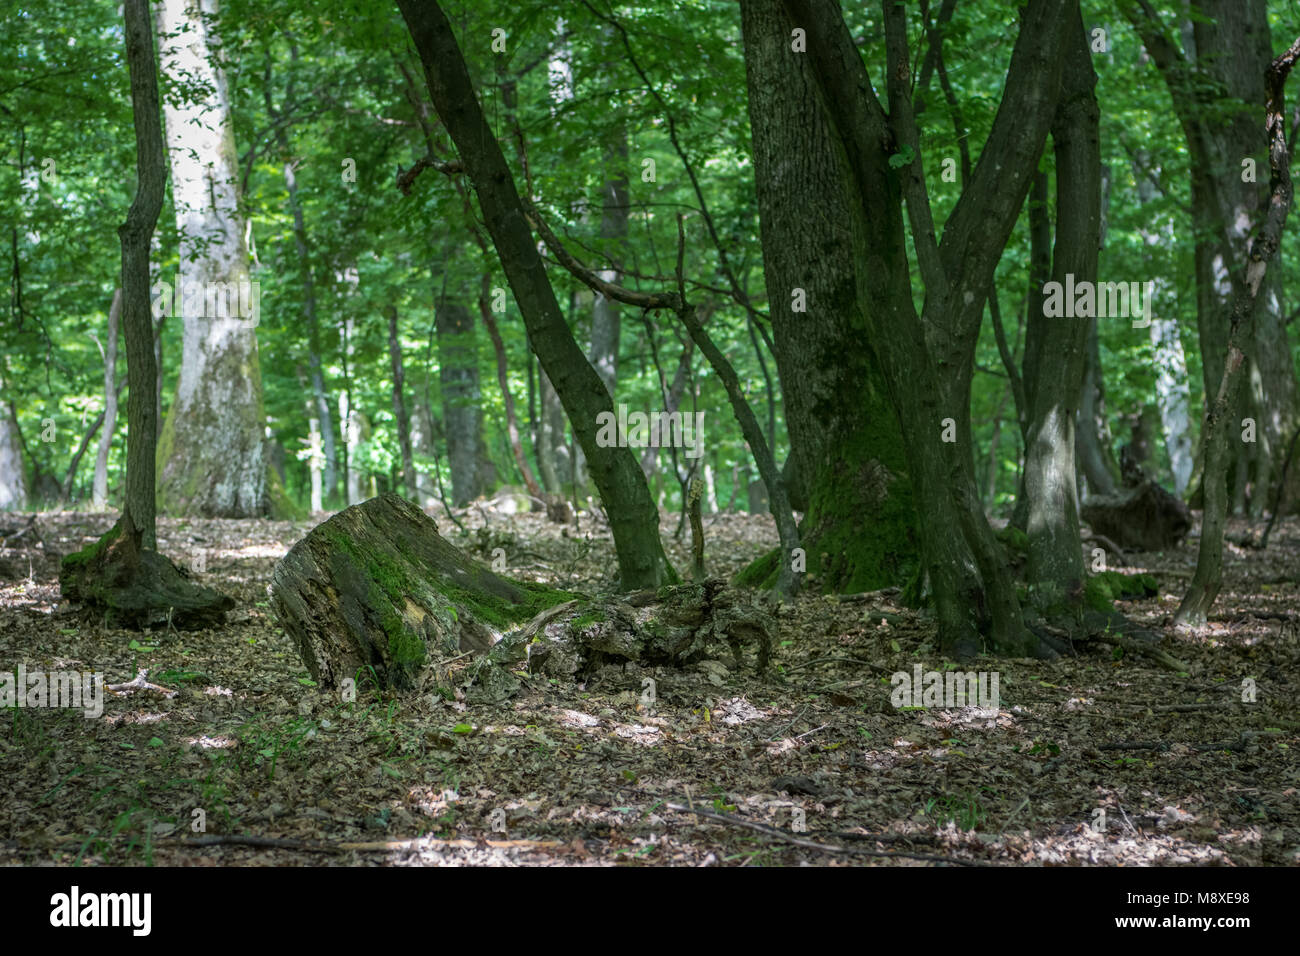 Nice tree trunks in the forest Stock Photo